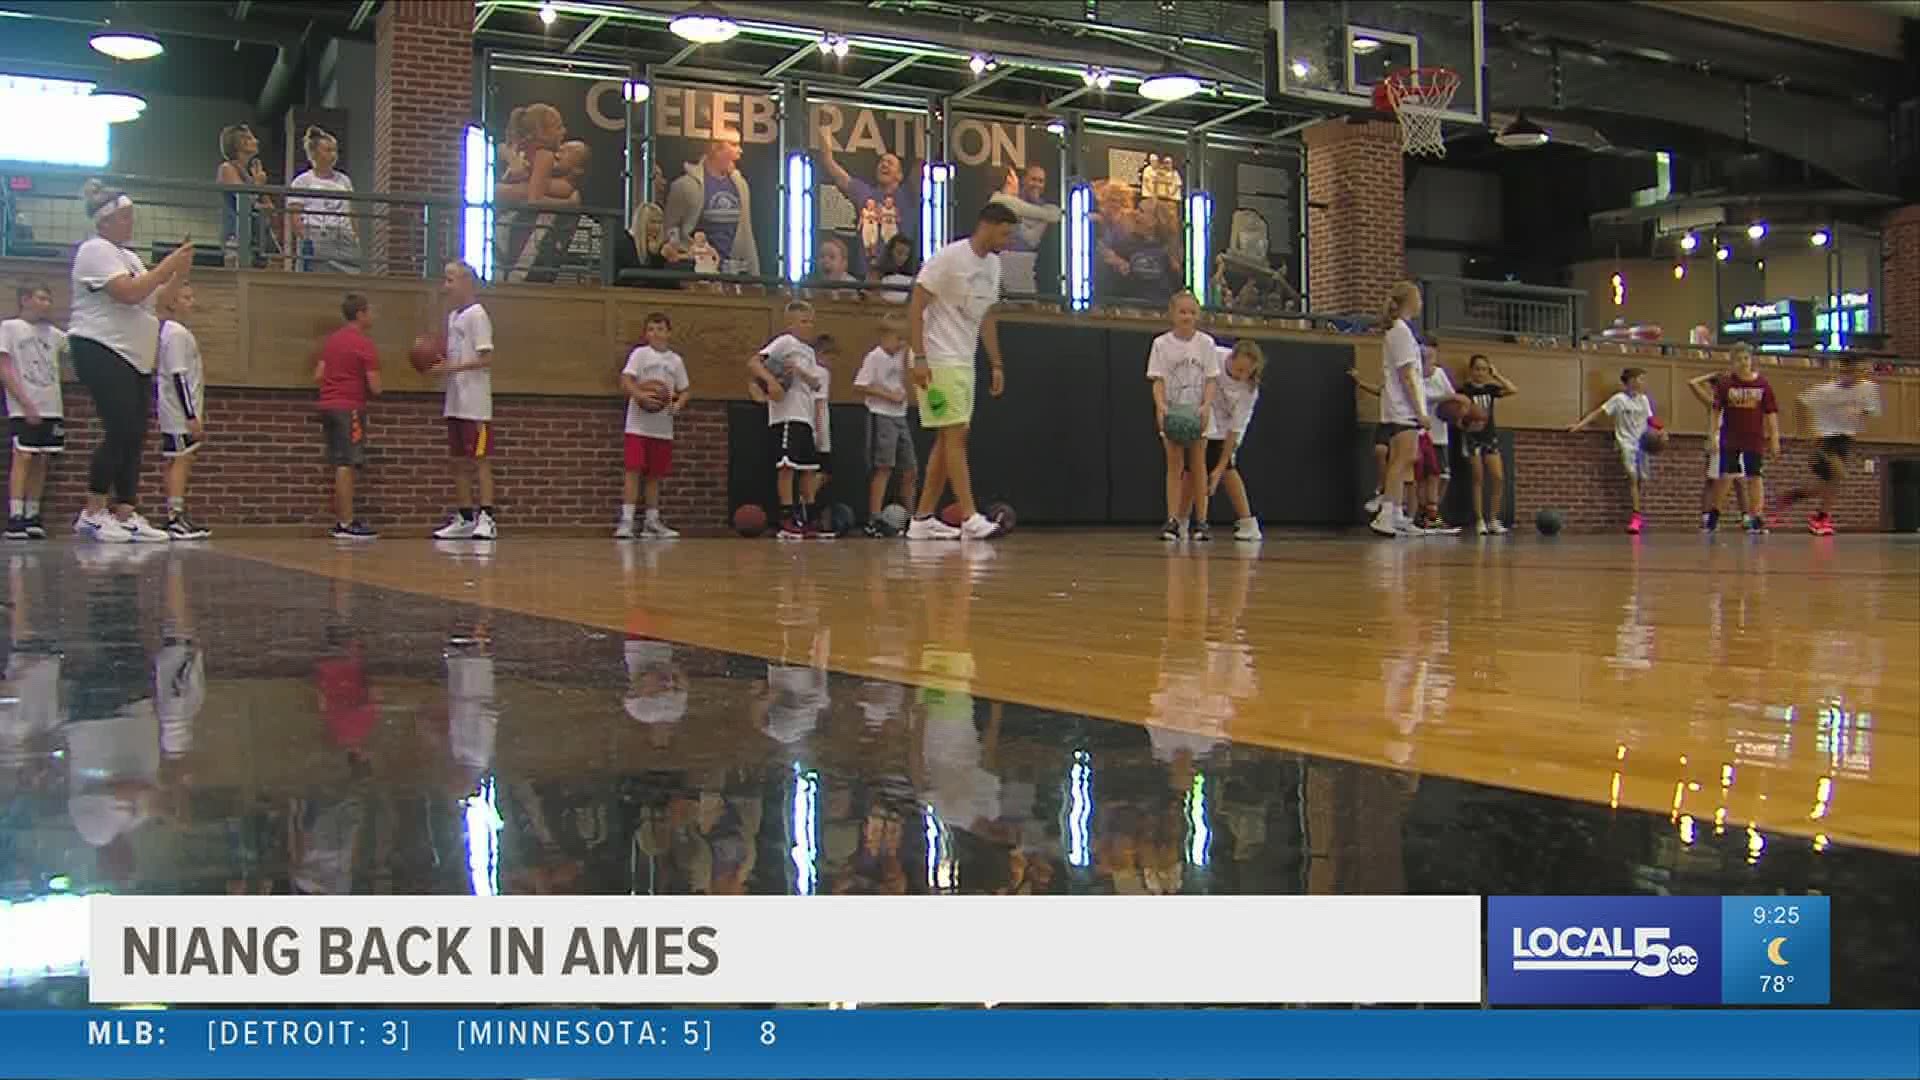 Georges Niang teamed up with Lyndsey Fennelly for youth basketball camp in Ames on Monday. It's become an annual tradition for Niang on his trip back to Iowa.